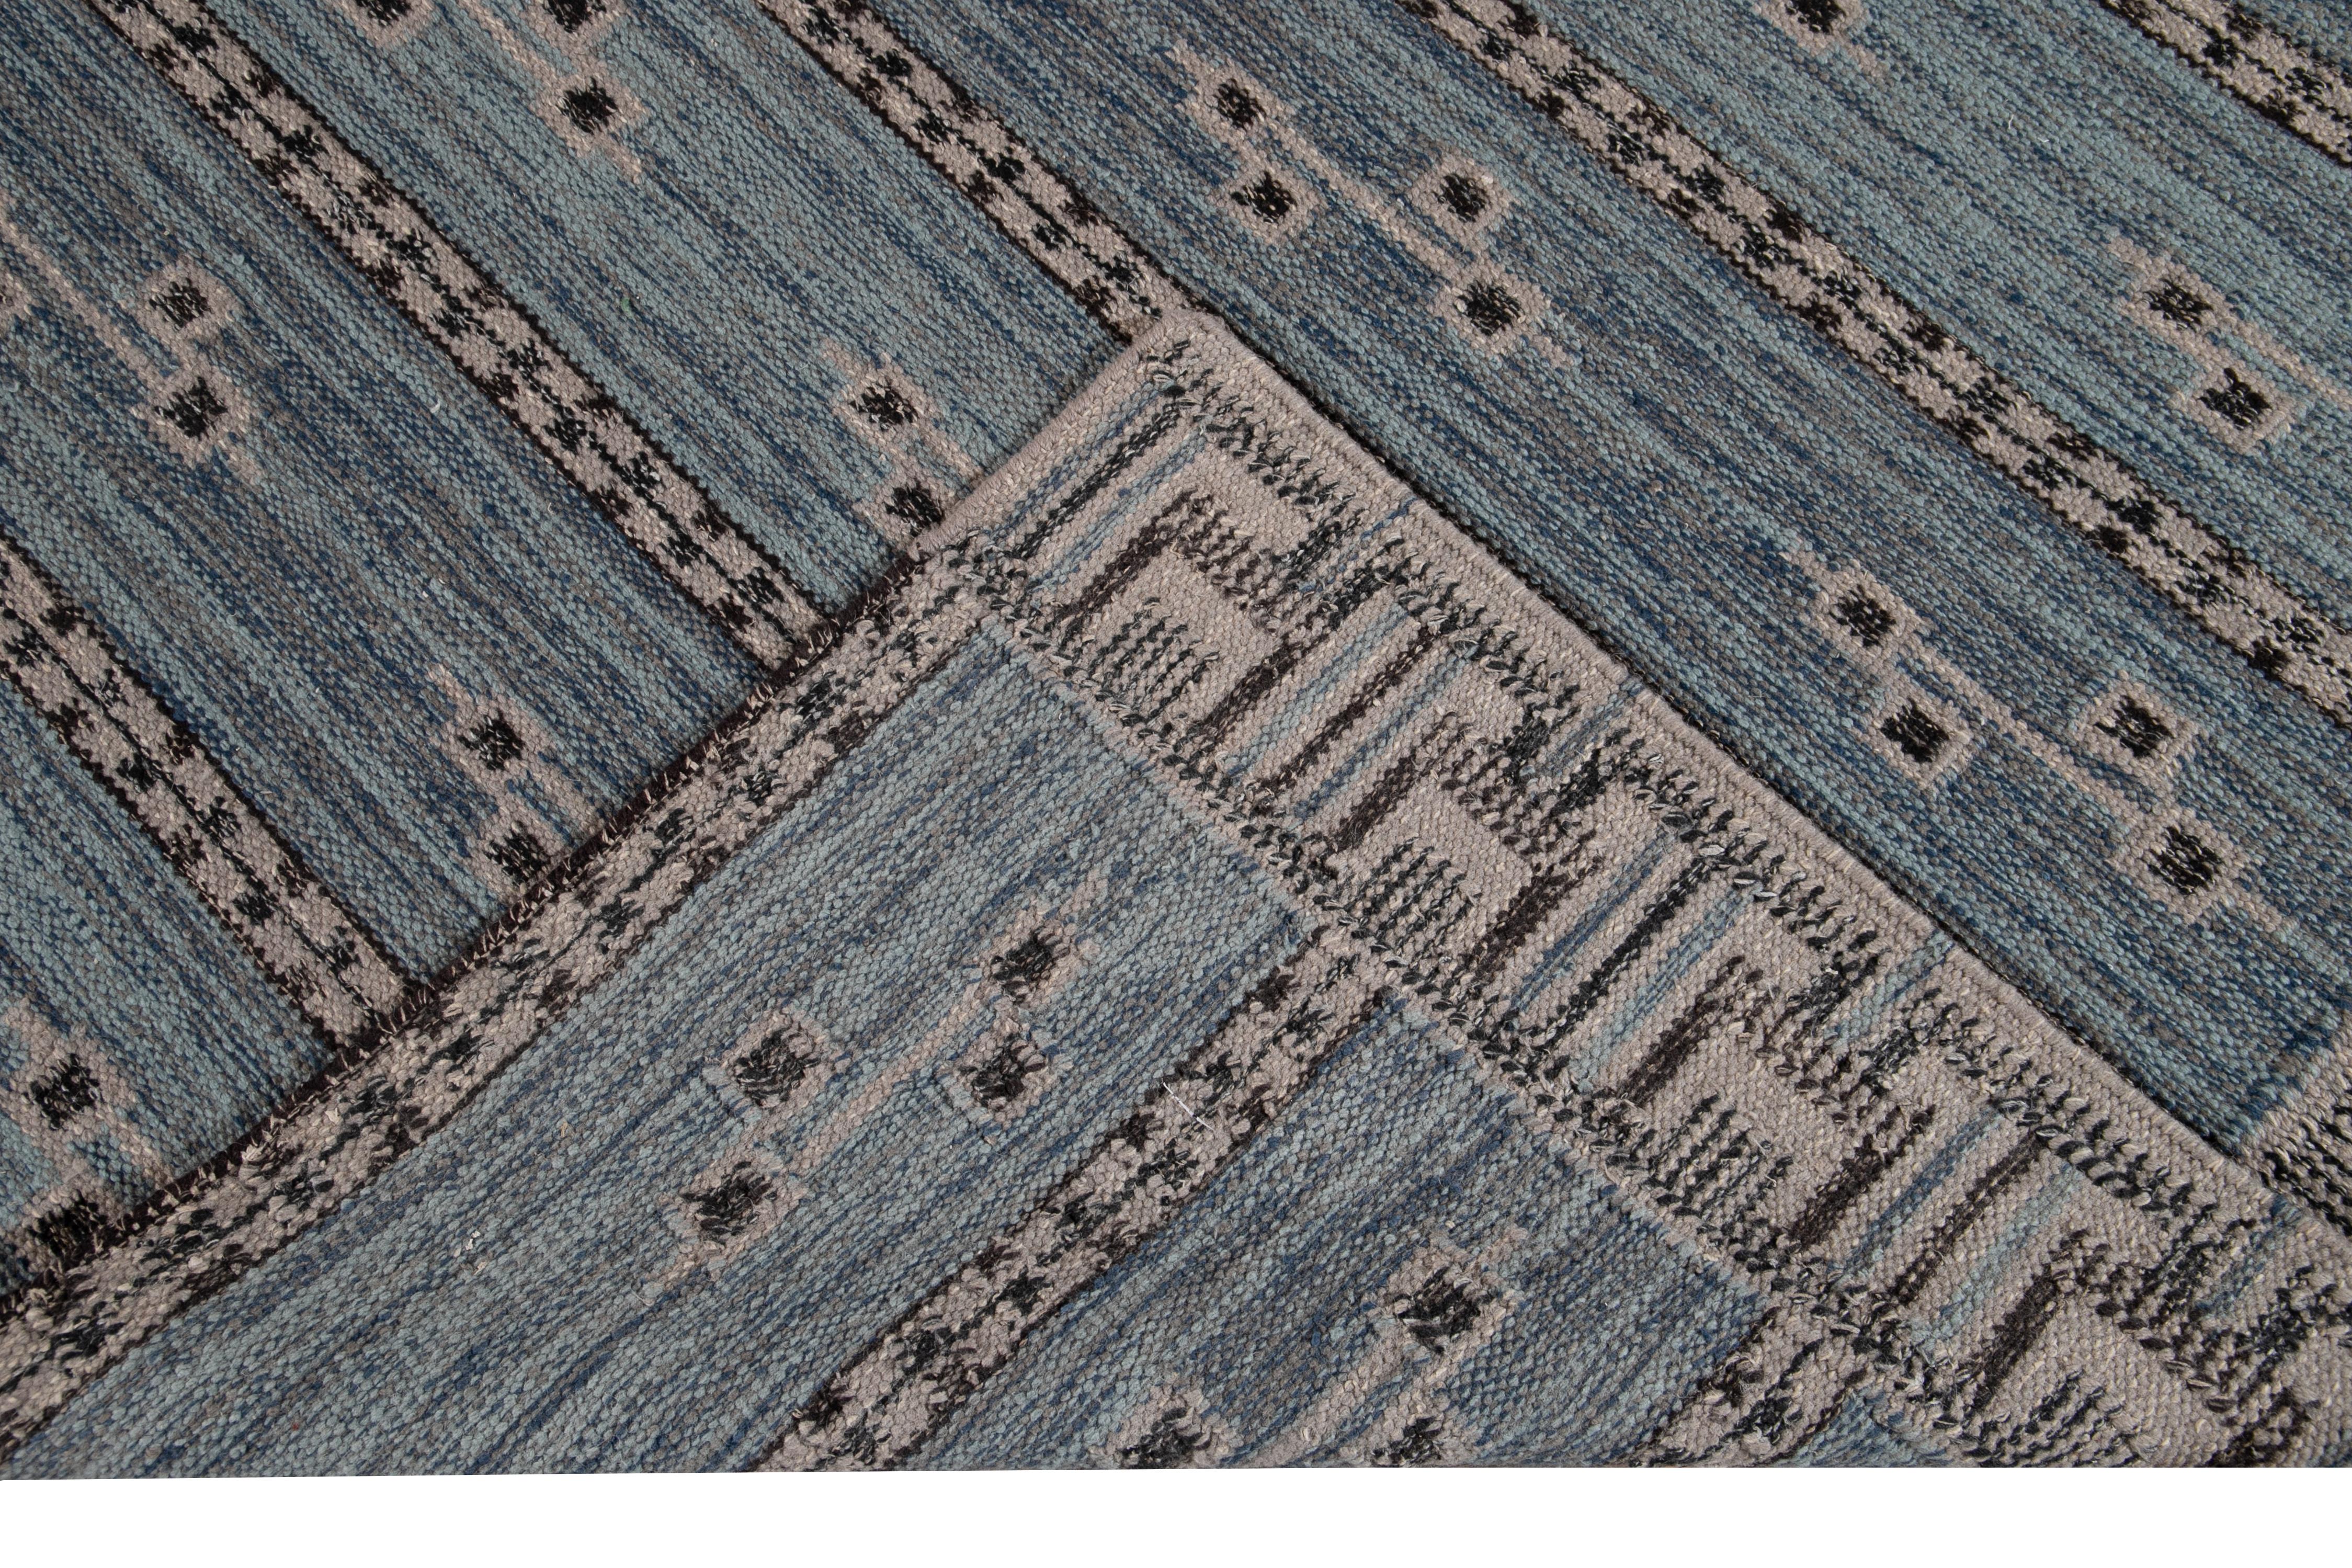 Beautiful modern oversize Swedish style wool rug with a navy-blue field. This Swedish rug has a black and gray accent in a gorgeous all-over geometric pattern design.

This rug measures: 12' x 16'3